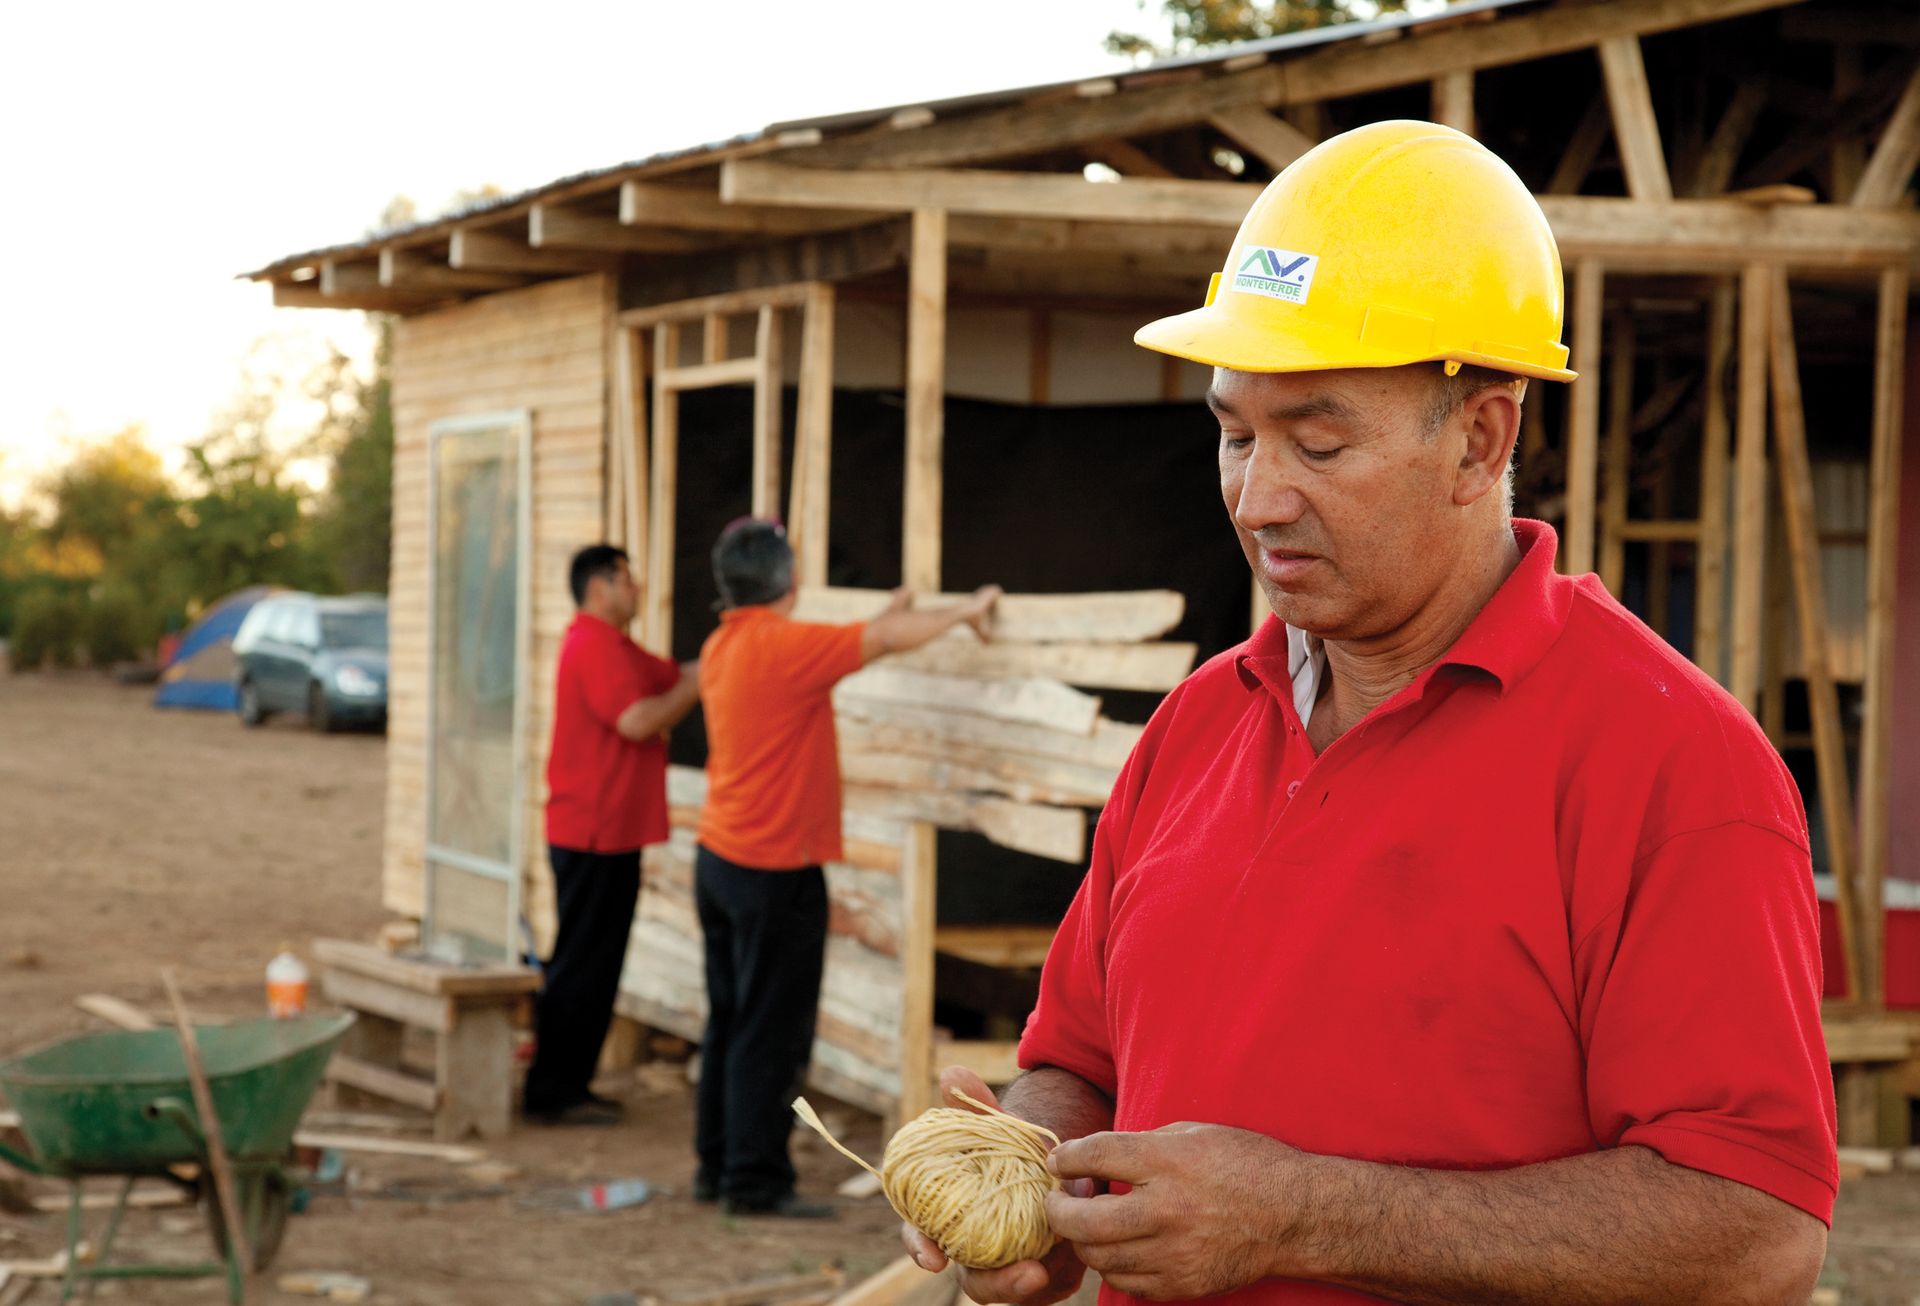 A group of men help rebuild a home after a natural disaster.